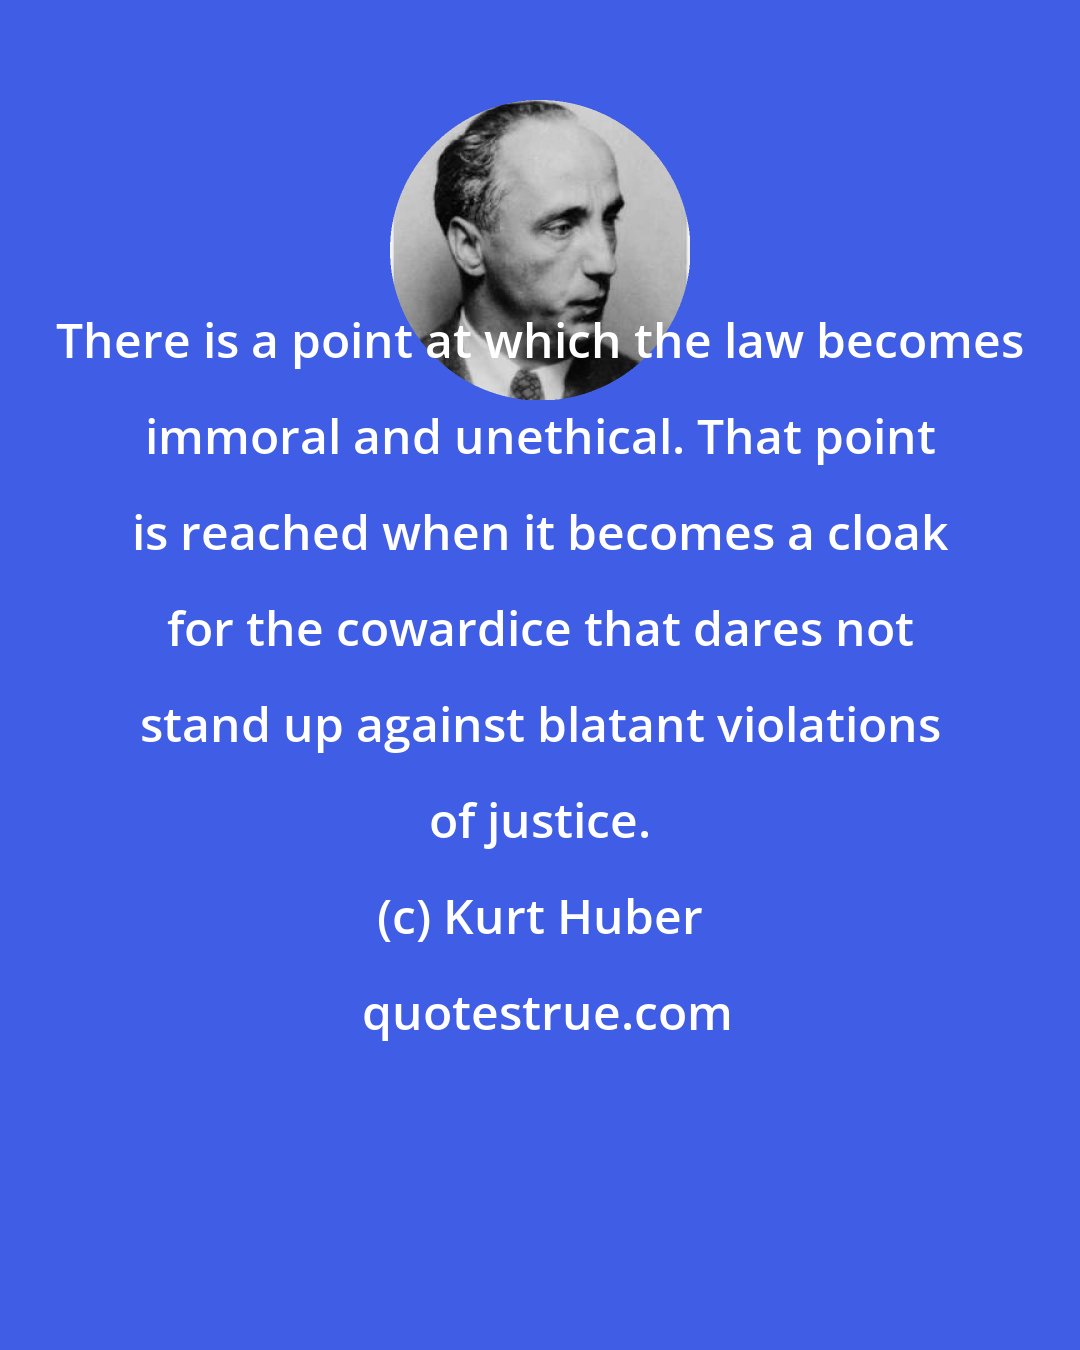 Kurt Huber: There is a point at which the law becomes immoral and unethical. That point is reached when it becomes a cloak for the cowardice that dares not stand up against blatant violations of justice.